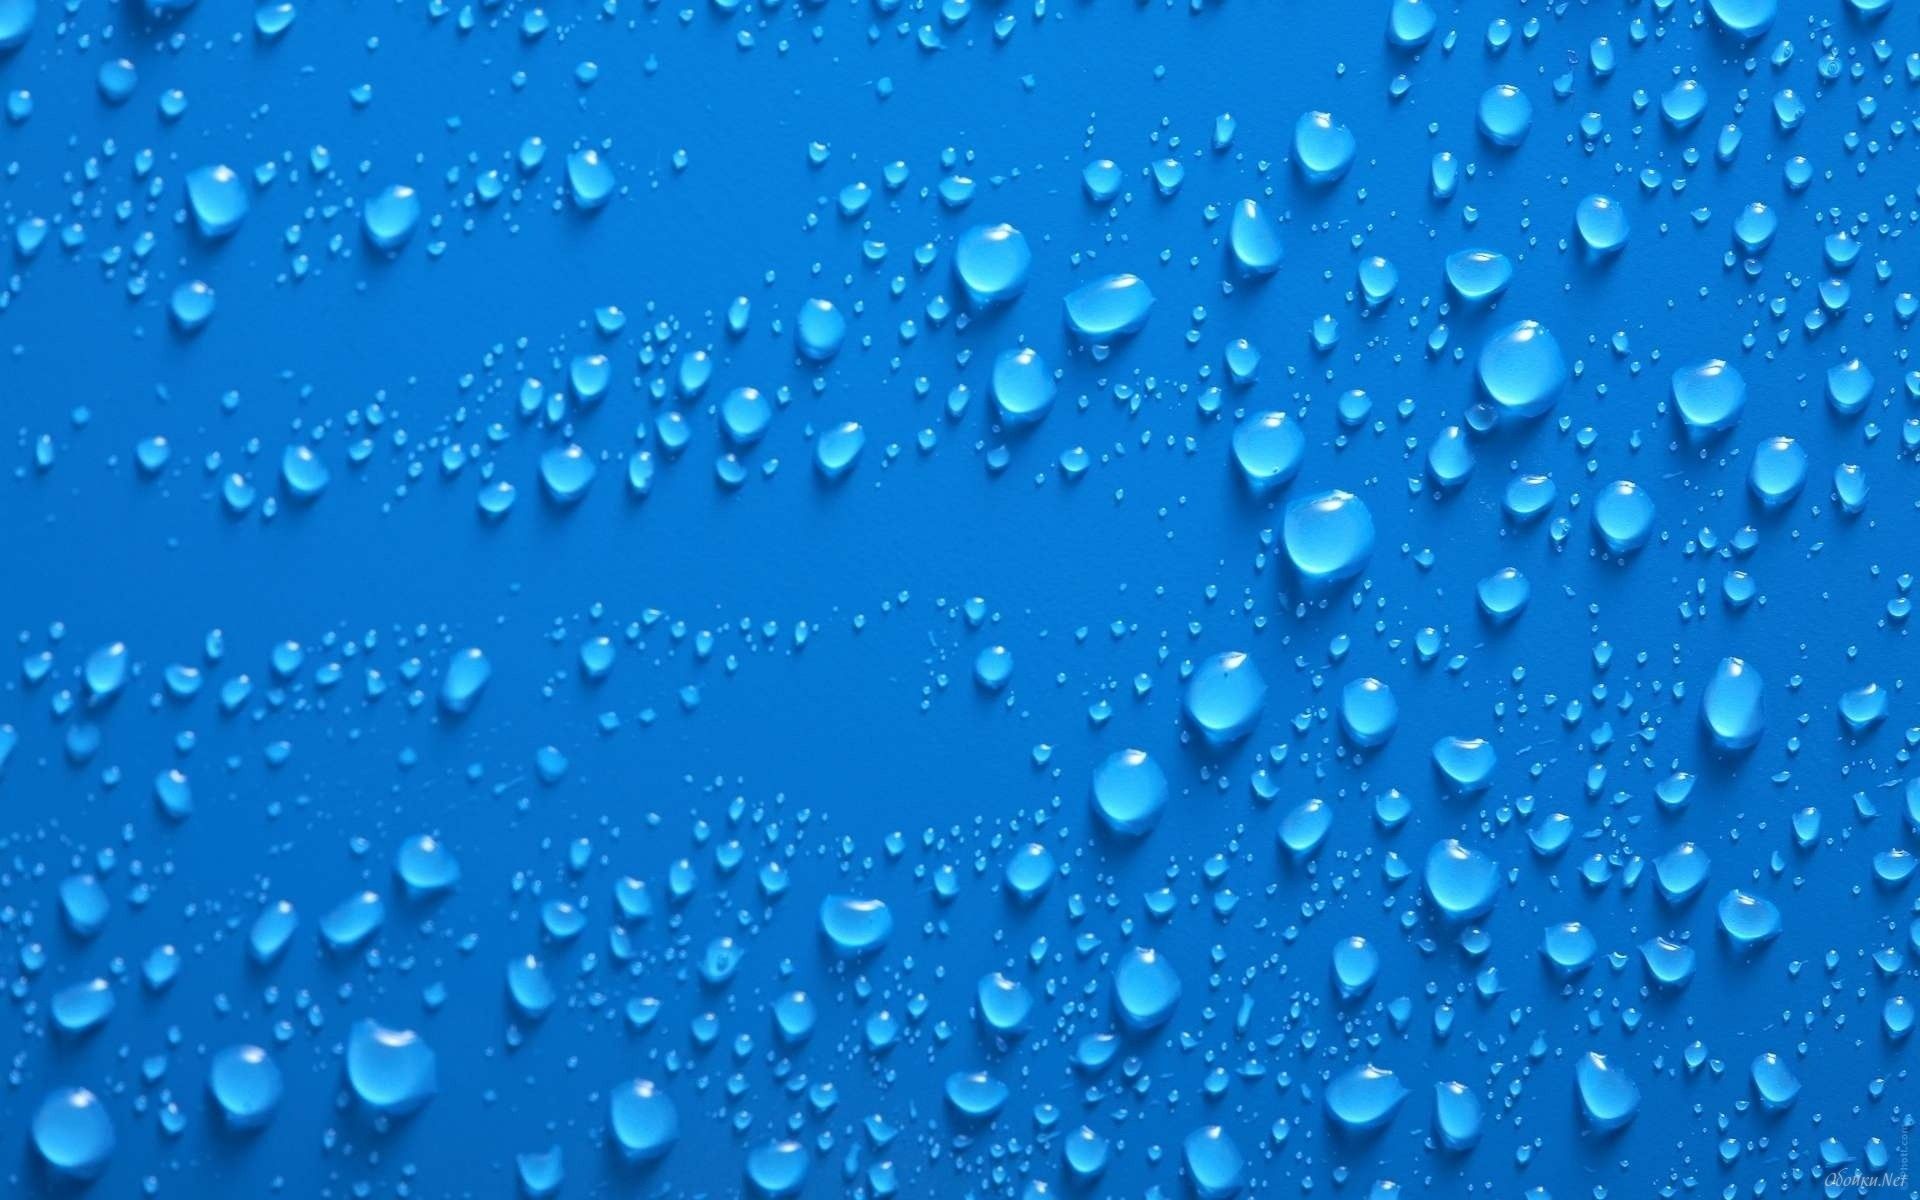 Gallery for - blue raindrops wallpaper